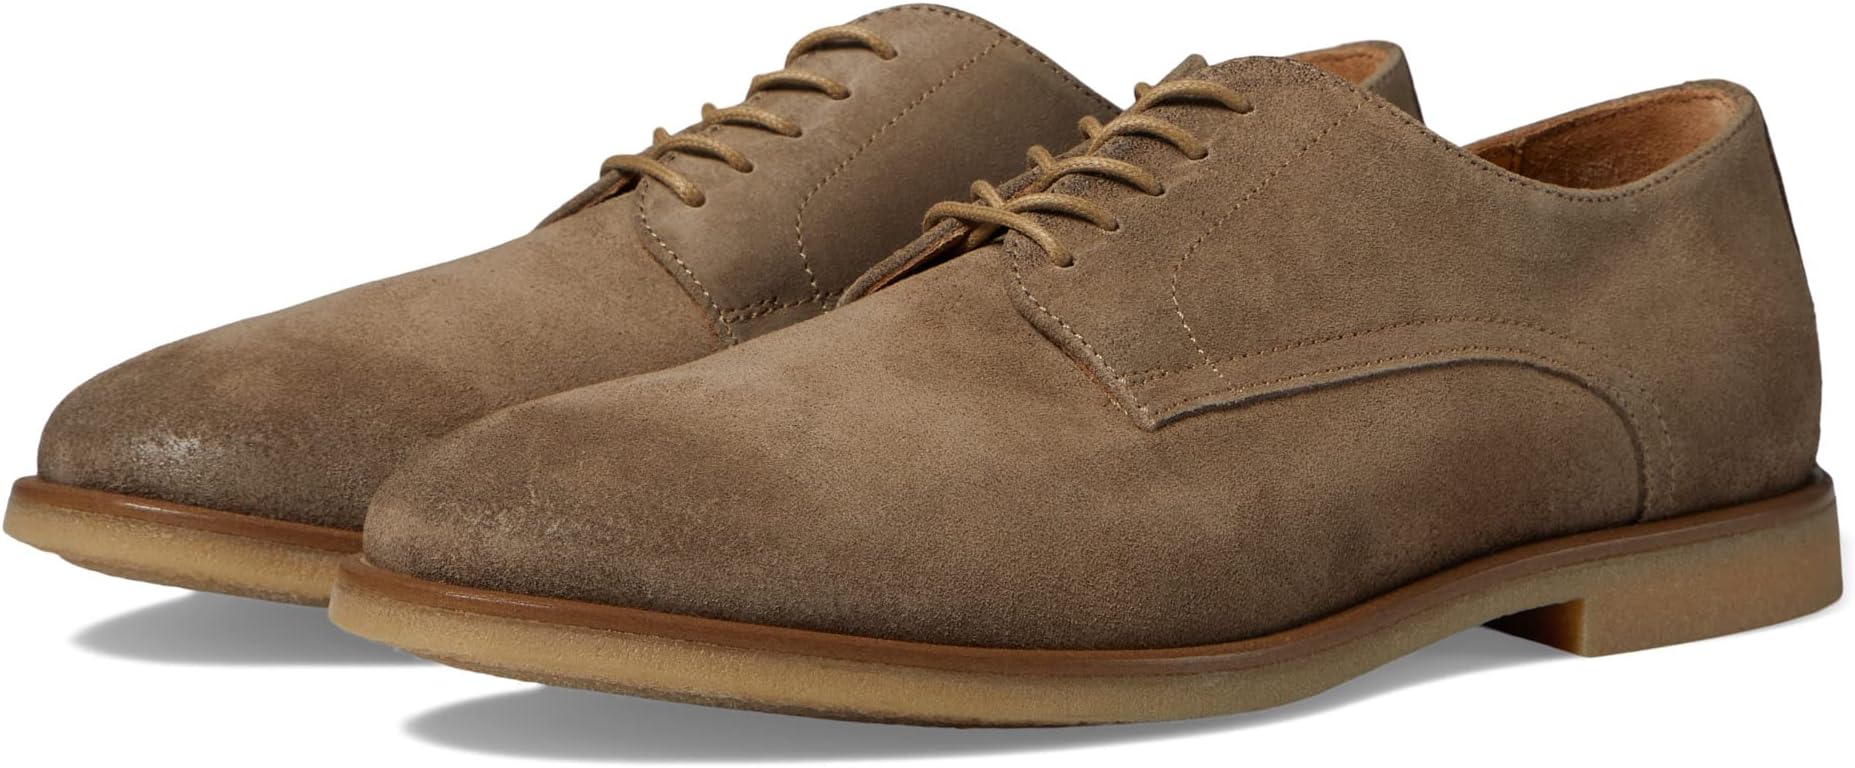 Оксфорды Asher To Boot New York, цвет Taupe Suede